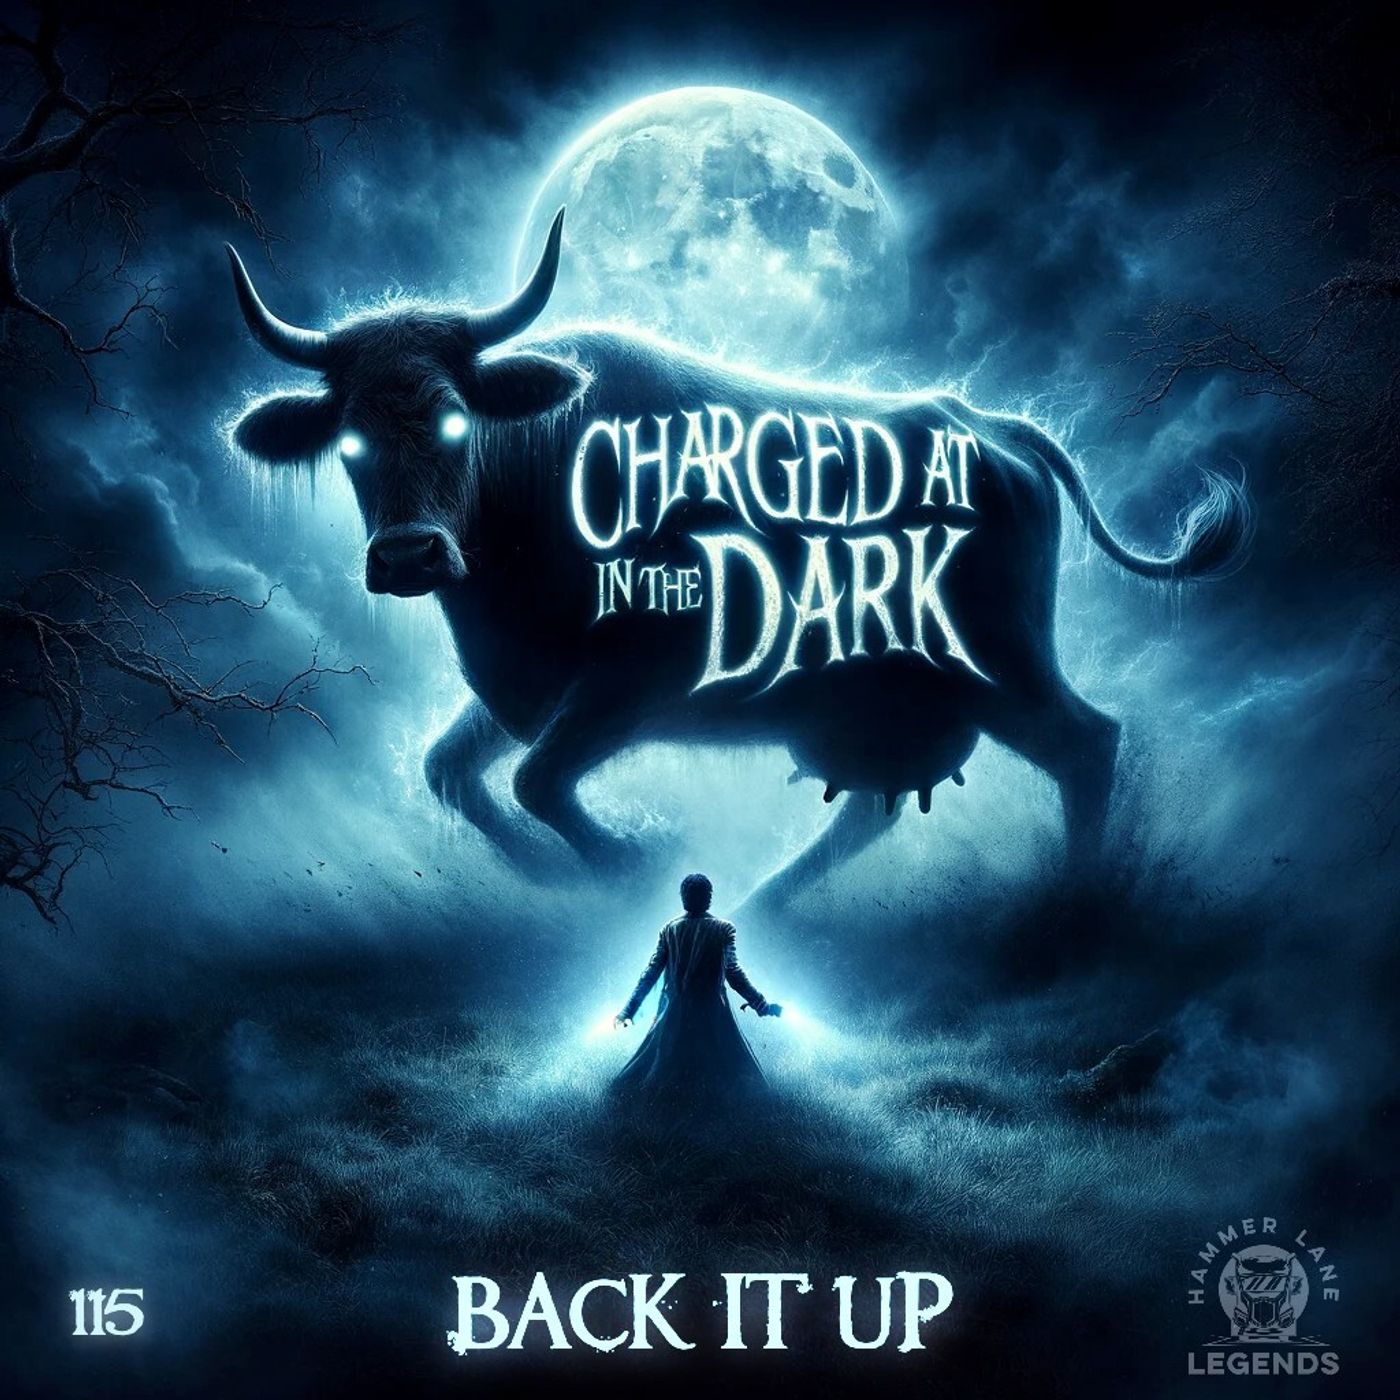 BACK IT UP | 115: Charged at in the Dark